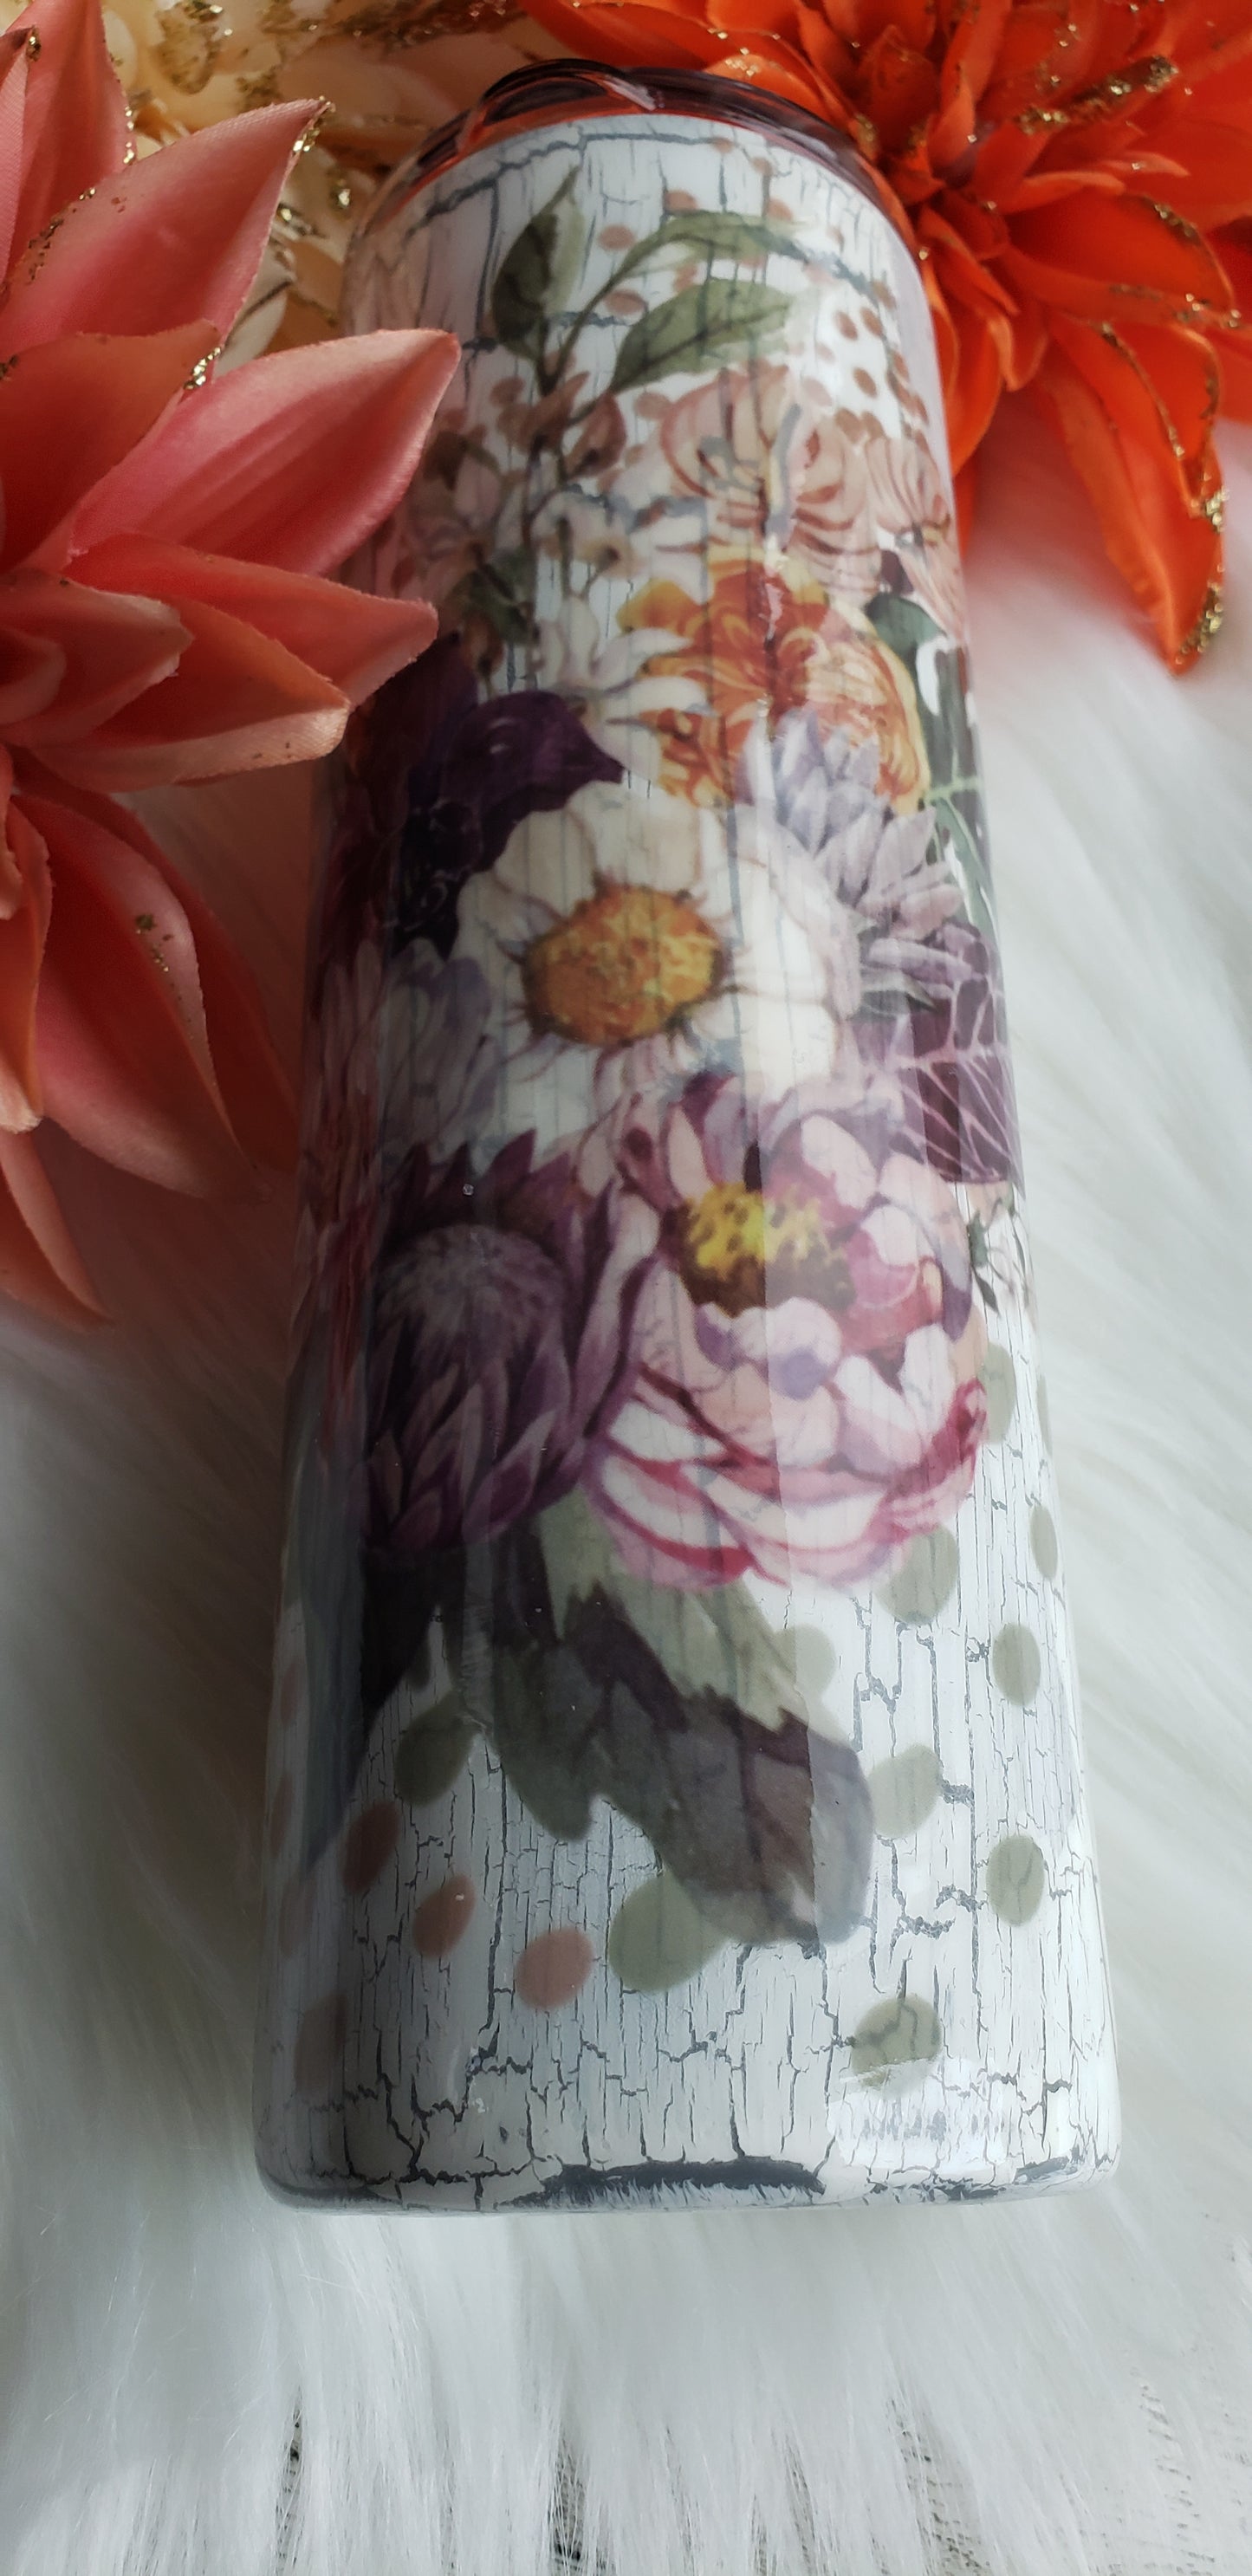 20 oz Floral Crackle  Stainless Steal Tumbler